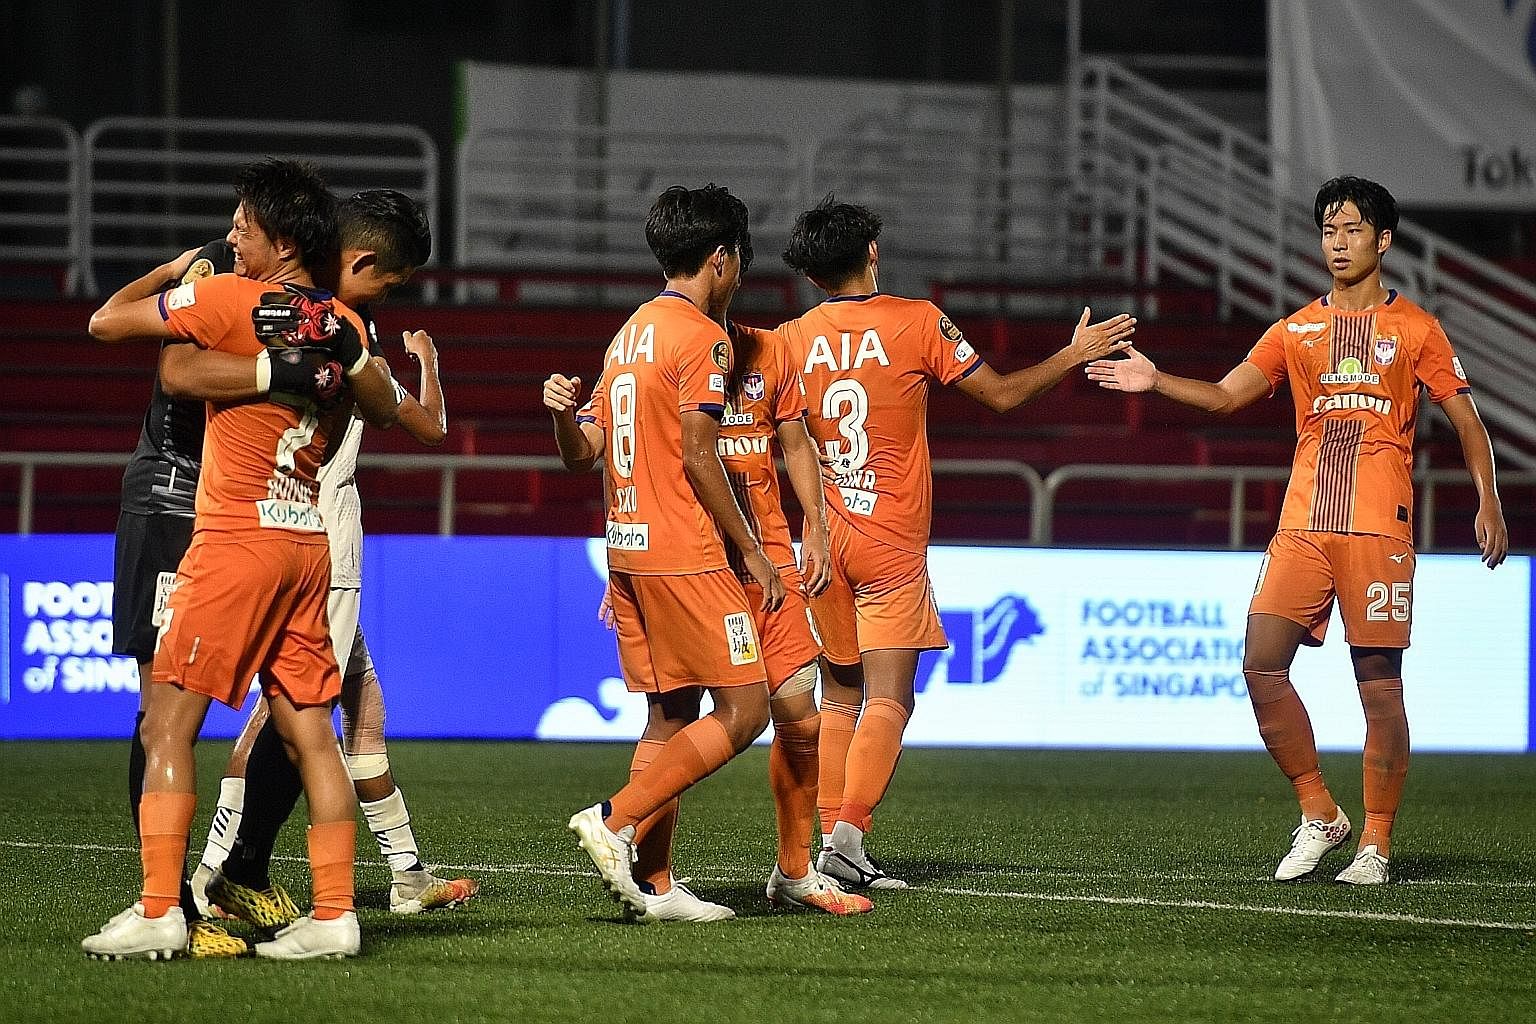 Albirex Niigata players celebrating their 2-1 win over visiting Tampines Rovers after the final whistle at the Jurong East Stadium last night.